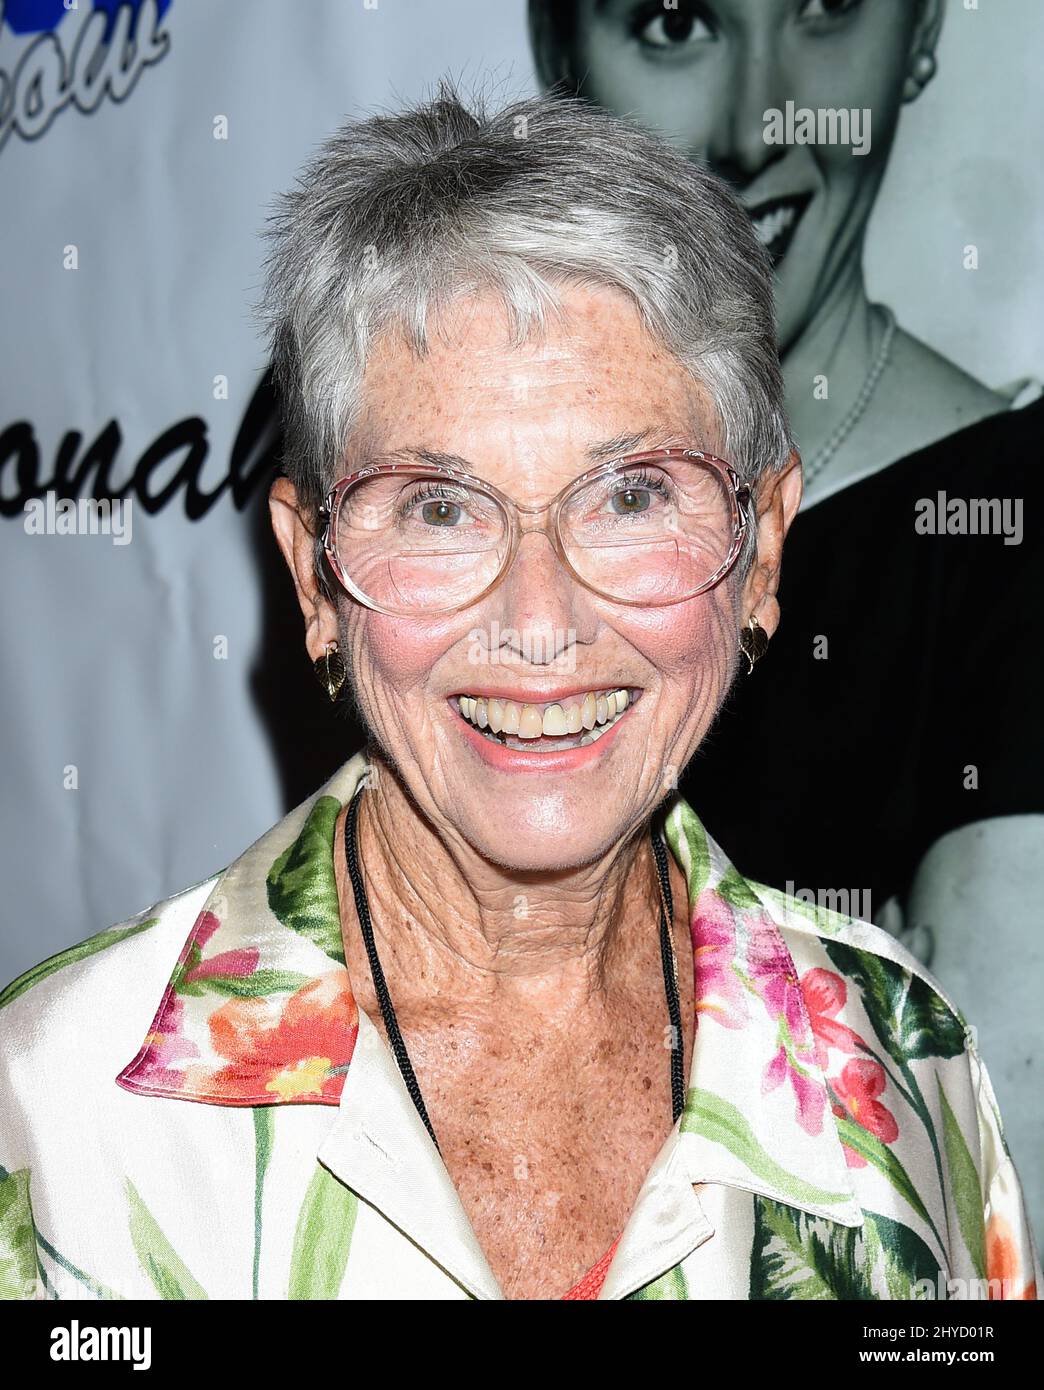 Elinor Donahue attending The Hollywood Show held at the Westin LAX Hotel Stock Photo